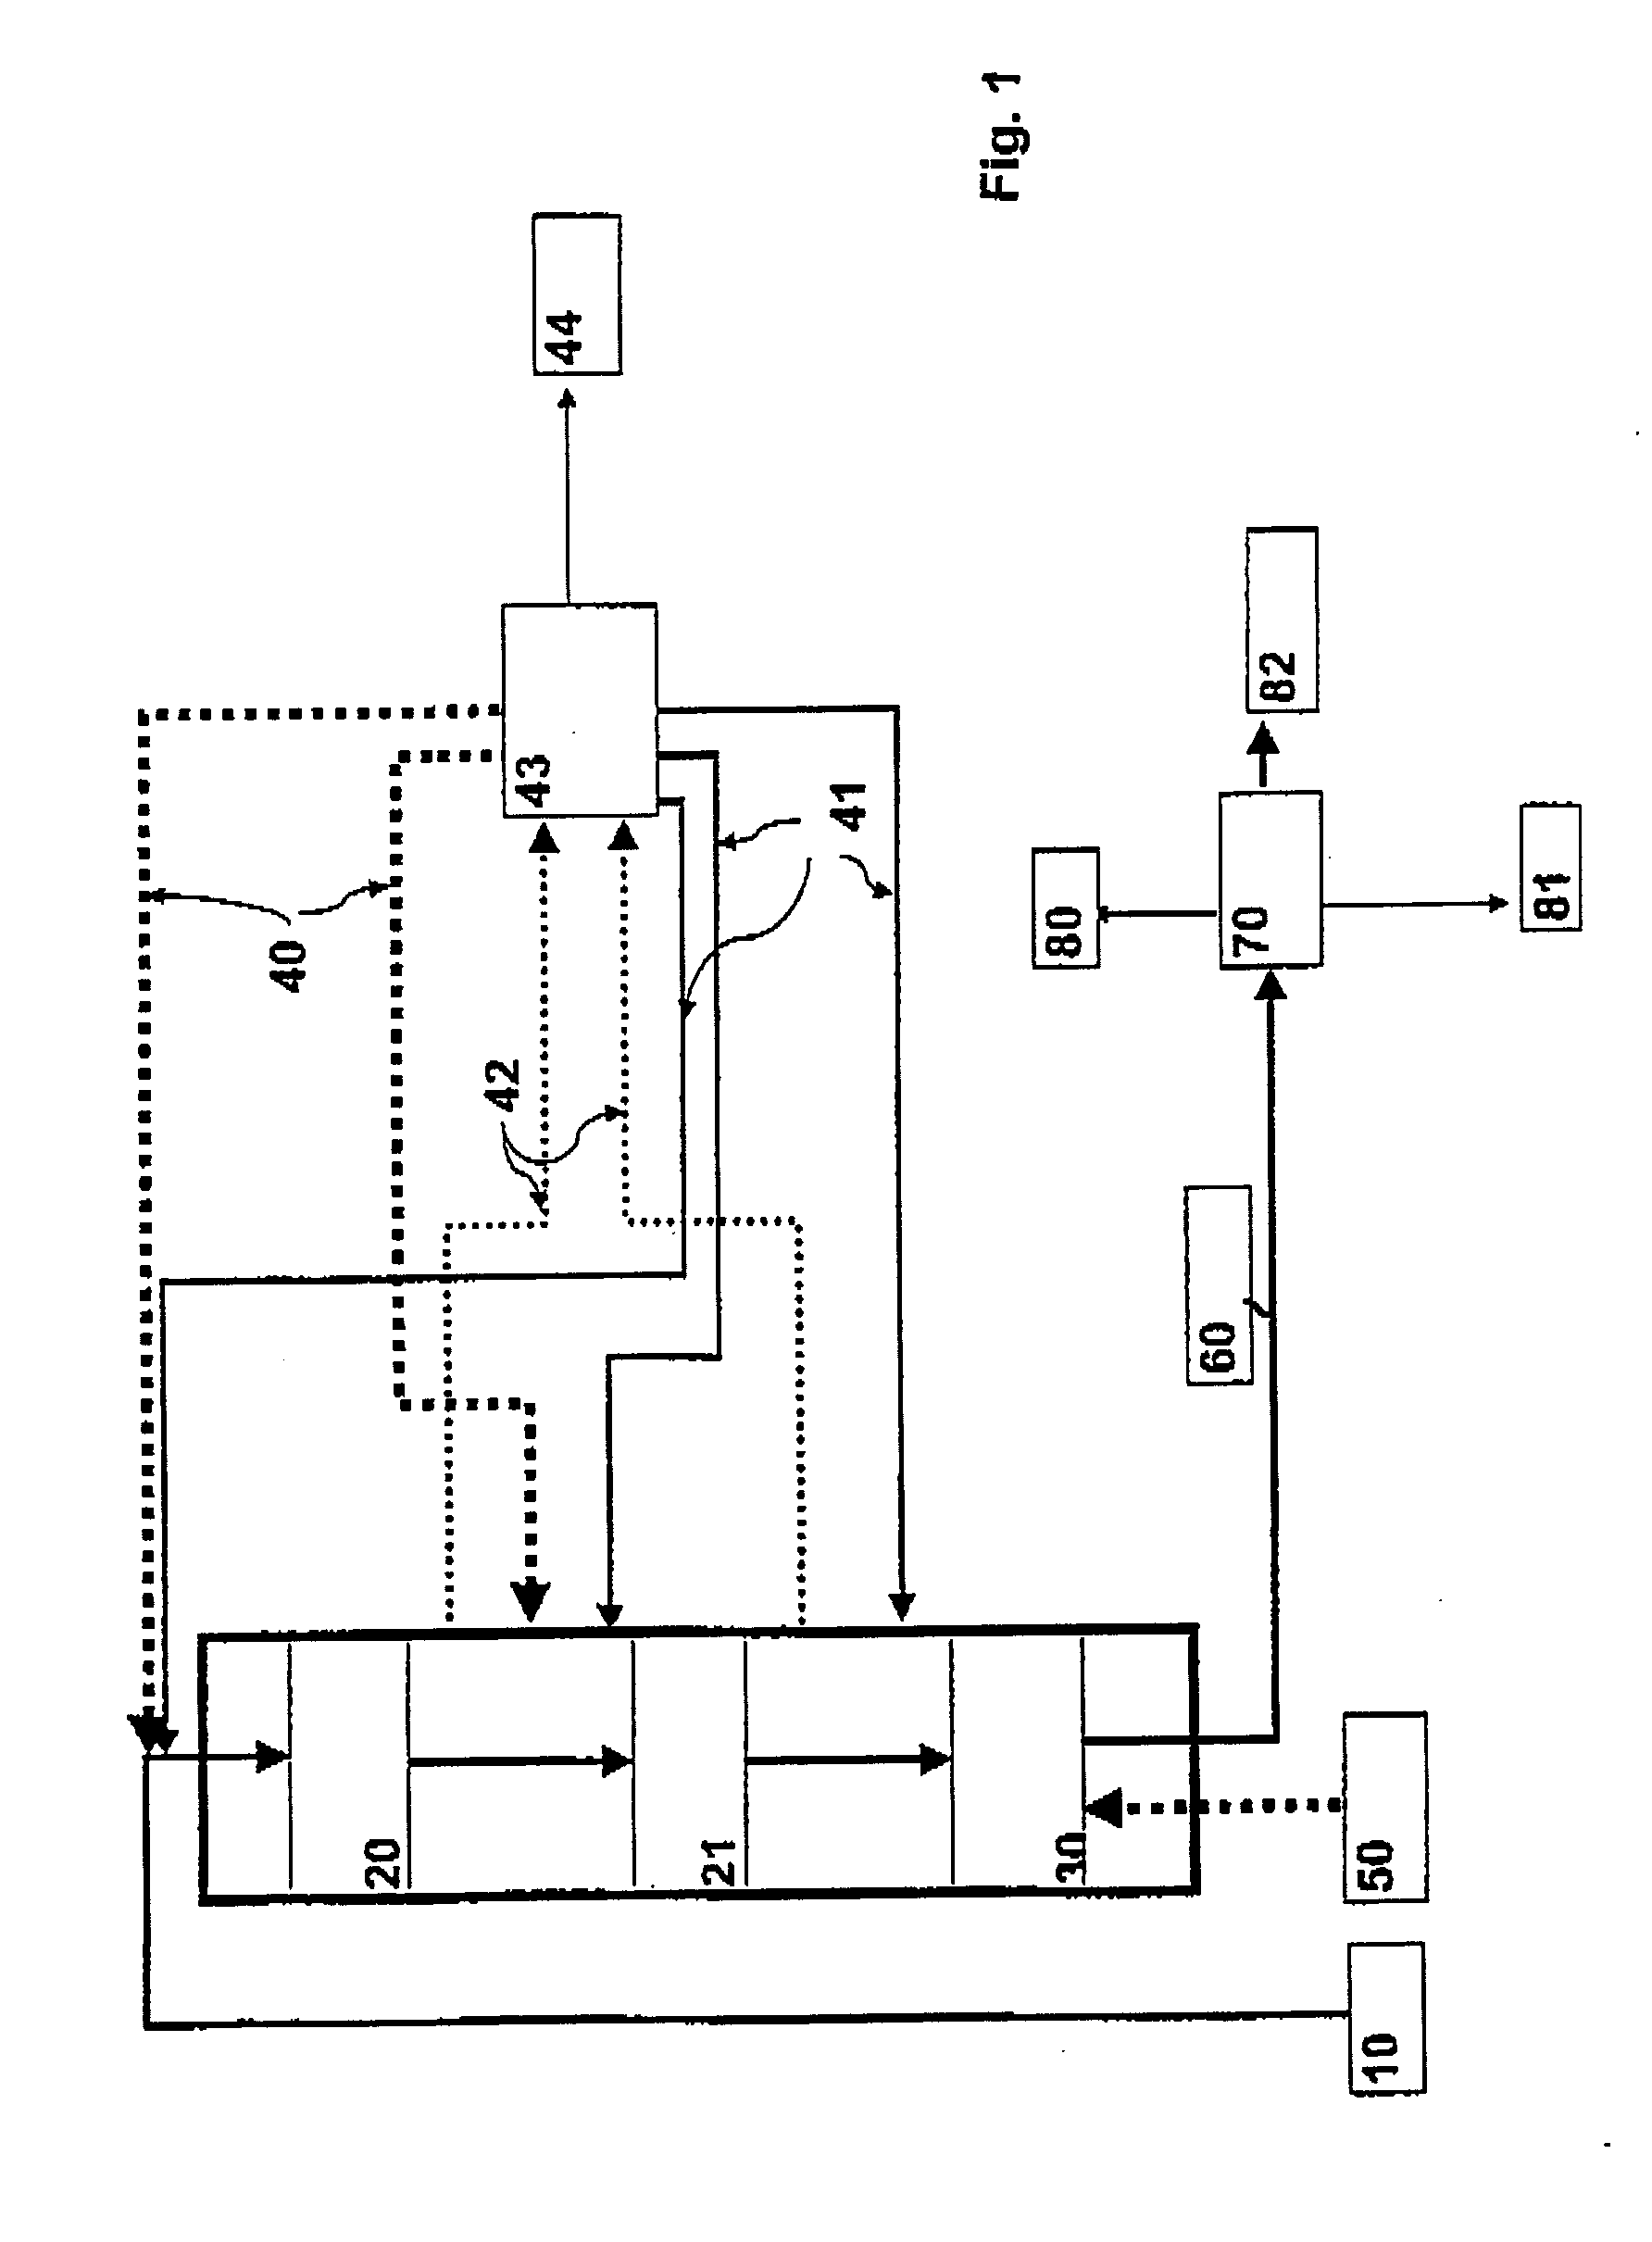 Process for producing a hydrocarbon component of biological origin